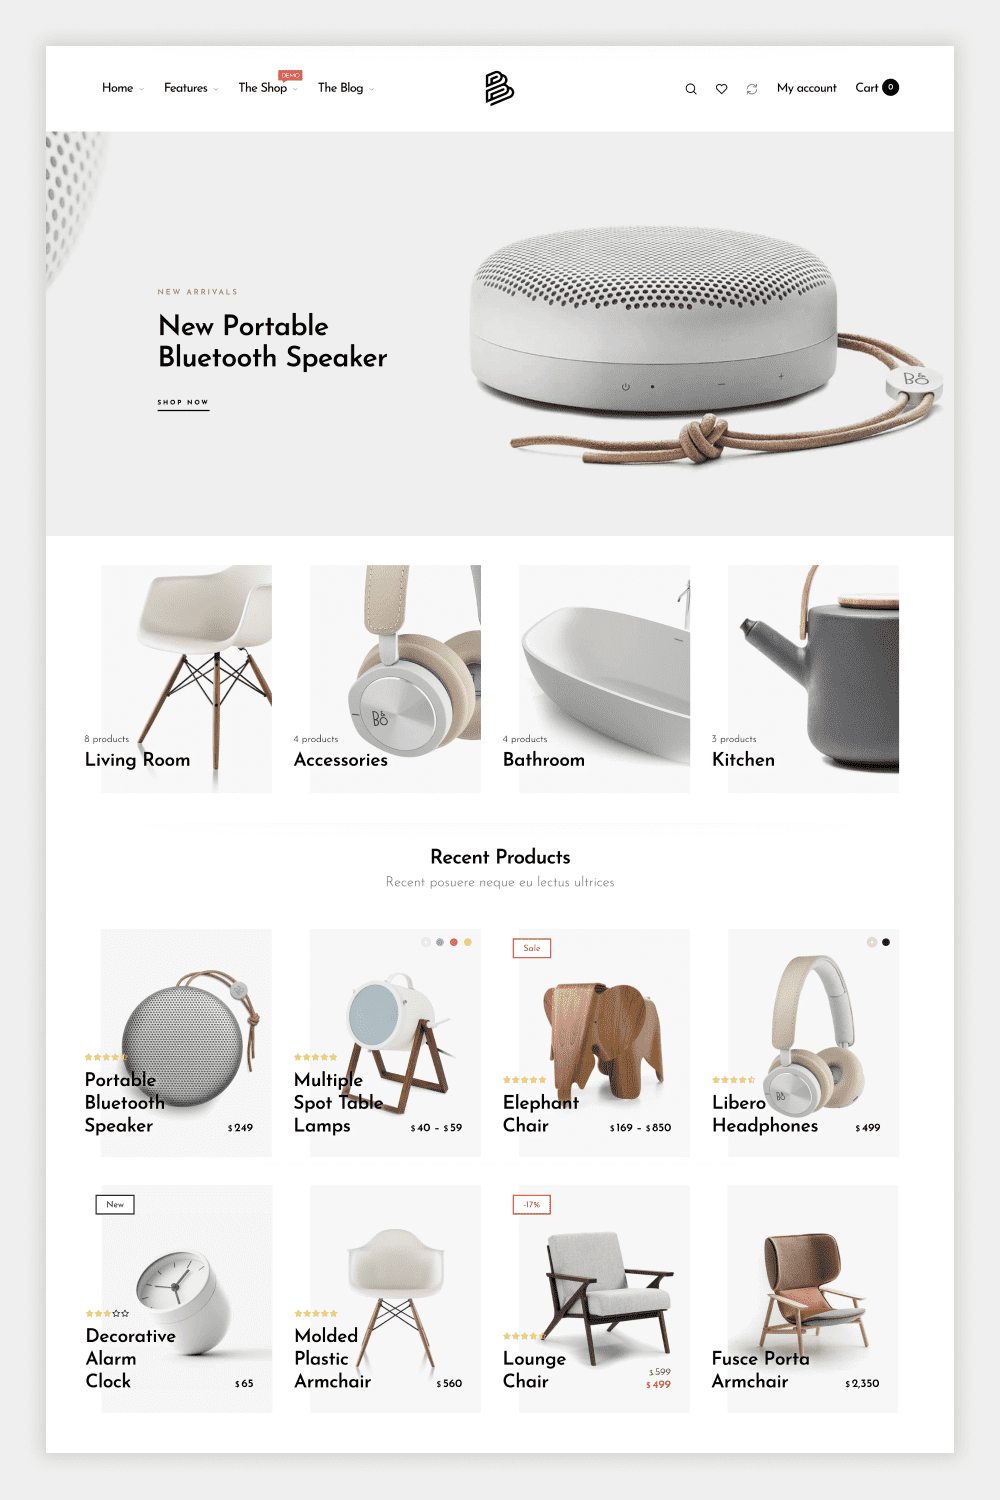 Main page of the online store of accessories and furniture for the home.